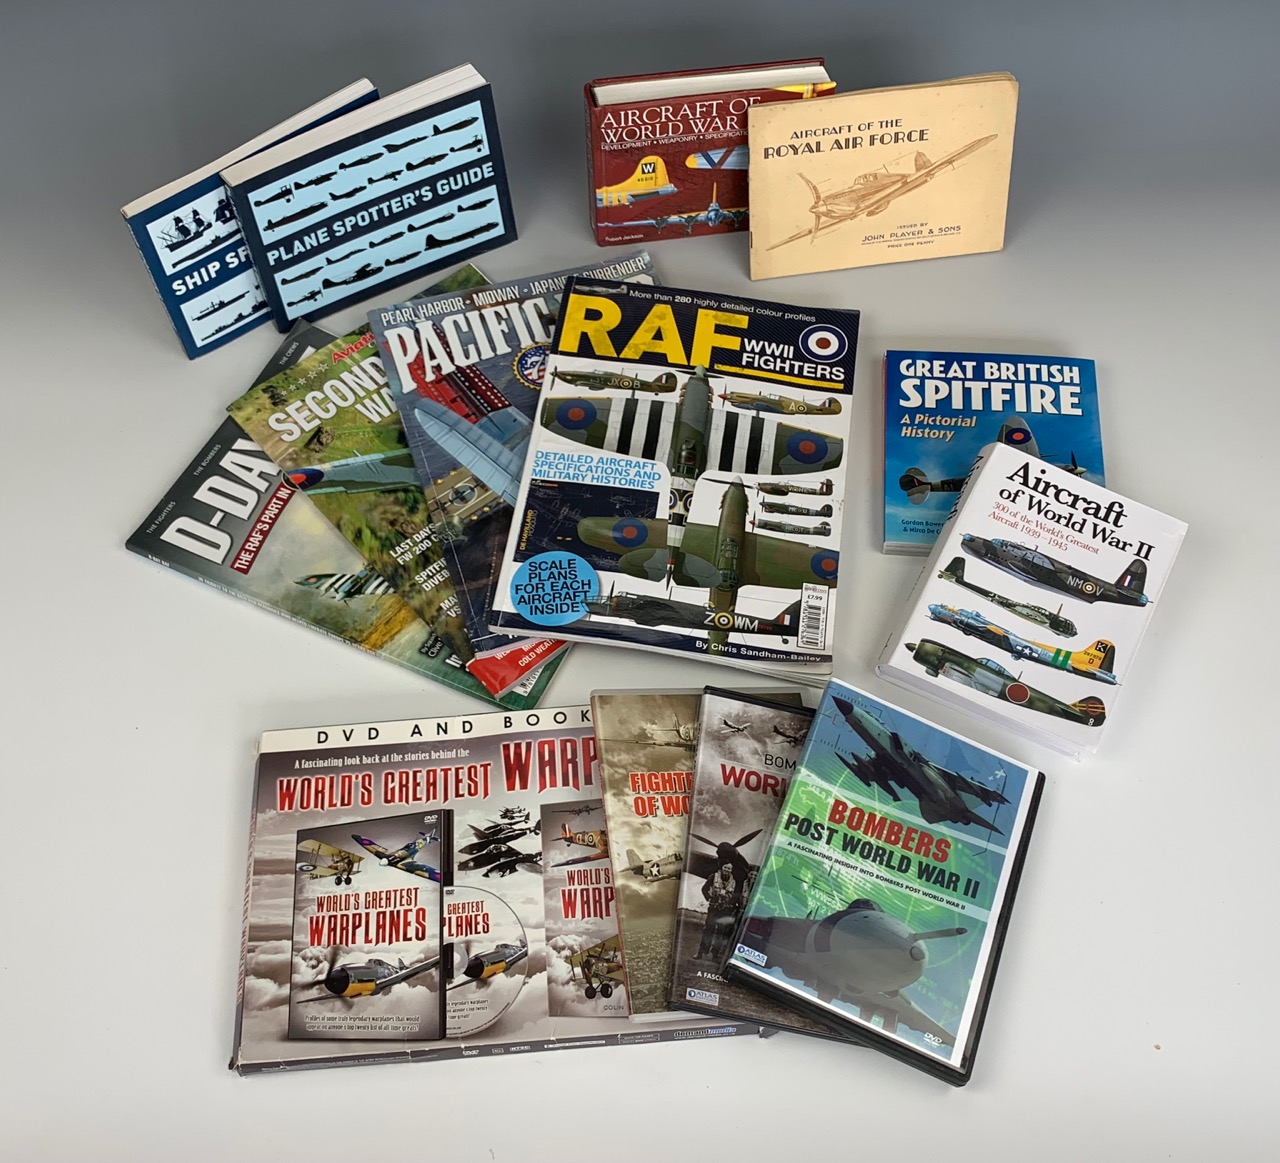 A quantity of books and DVDs etc, on Second World War and other military aircraft, including RAF